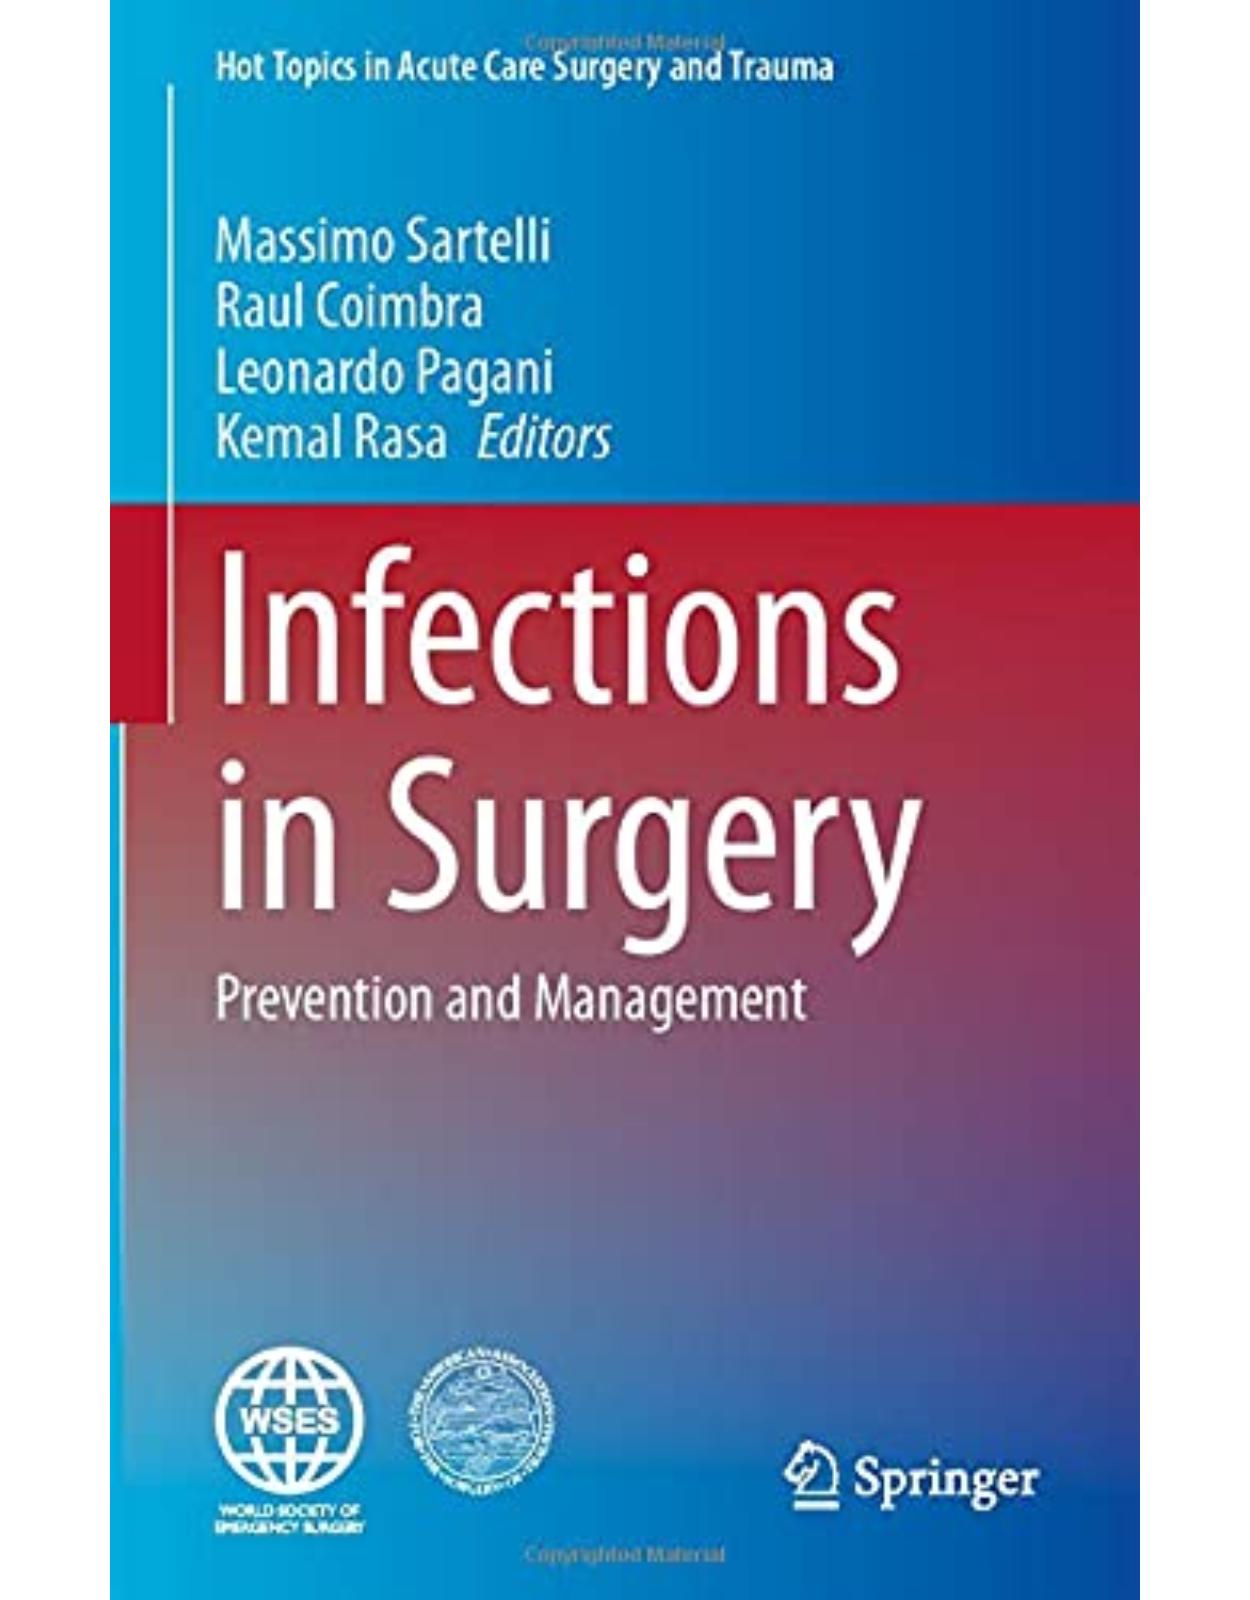 Infections in Surgery: Prevention and Management (Hot Topics in Acute Care Surgery and Trauma) 